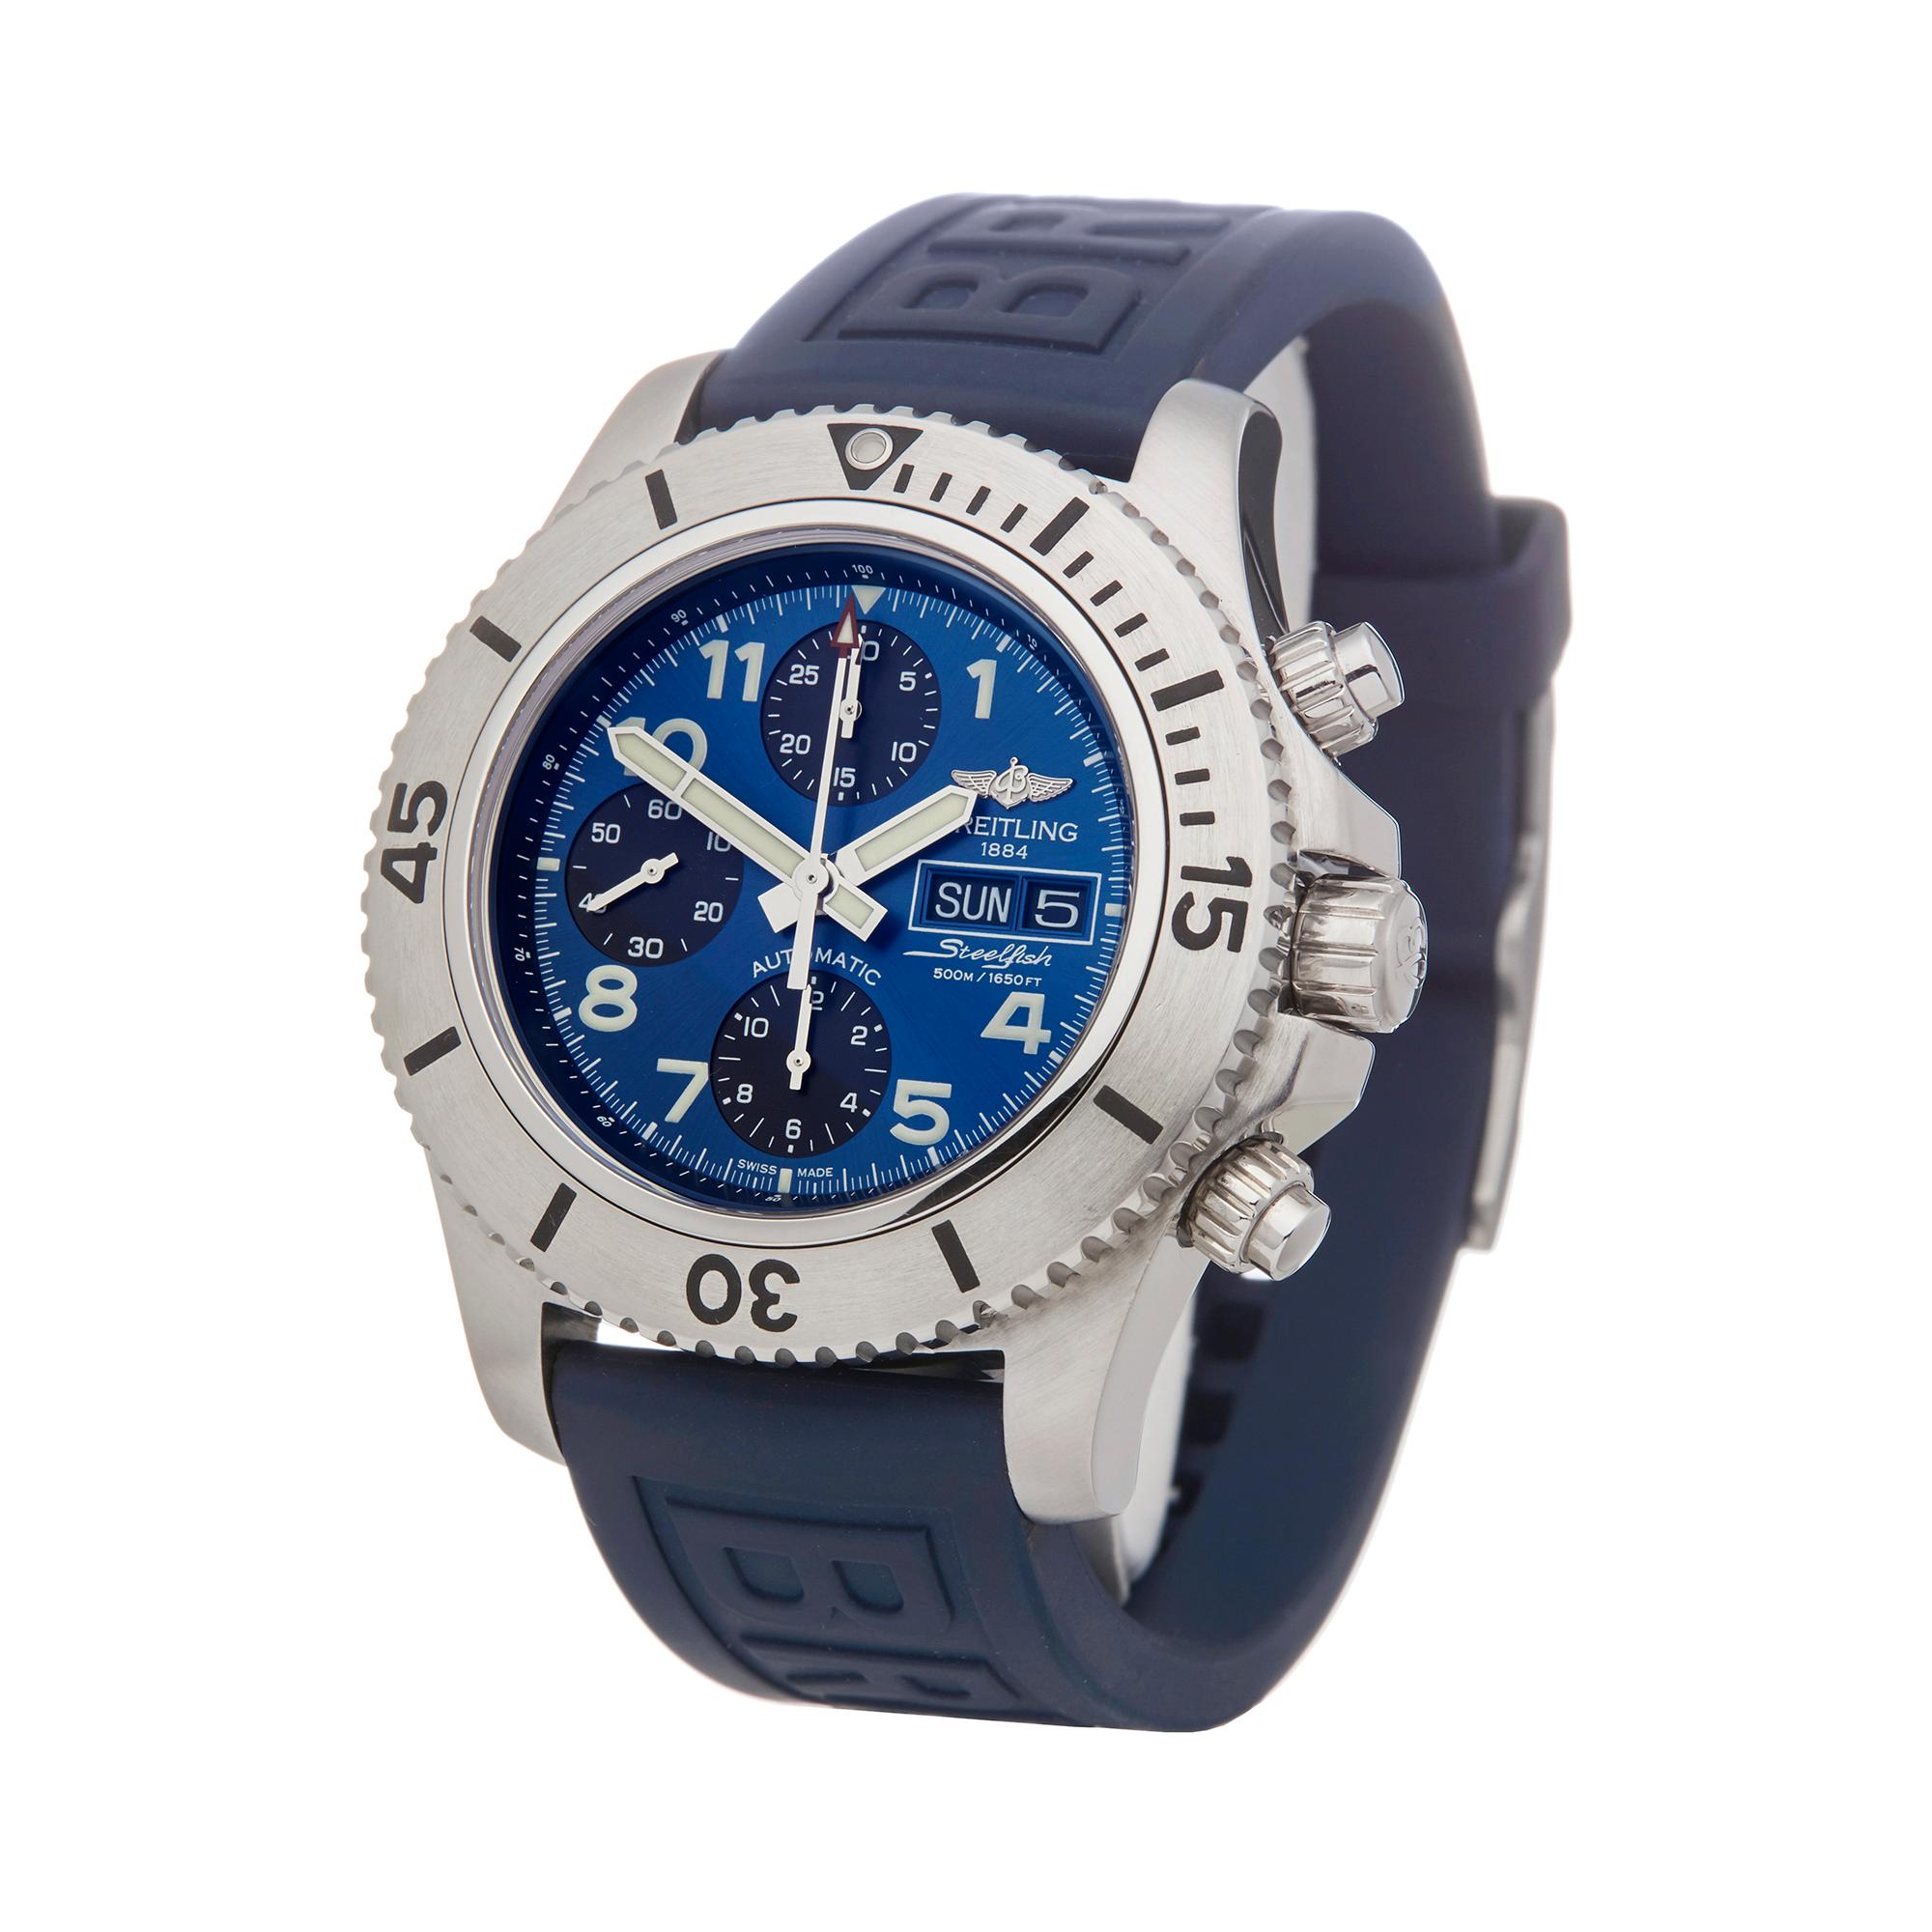 Reference: W5824
Manufacturer: Breitling
Model: Steelfish
Model Reference: A13341
Age: 7th August 2017
Gender: Men's
Box and Papers: Box Manuals and Guarantee
Dial: Blue Arabic
Glass: Sapphire Crystal
Movement: Automatic
Water Resistance: To